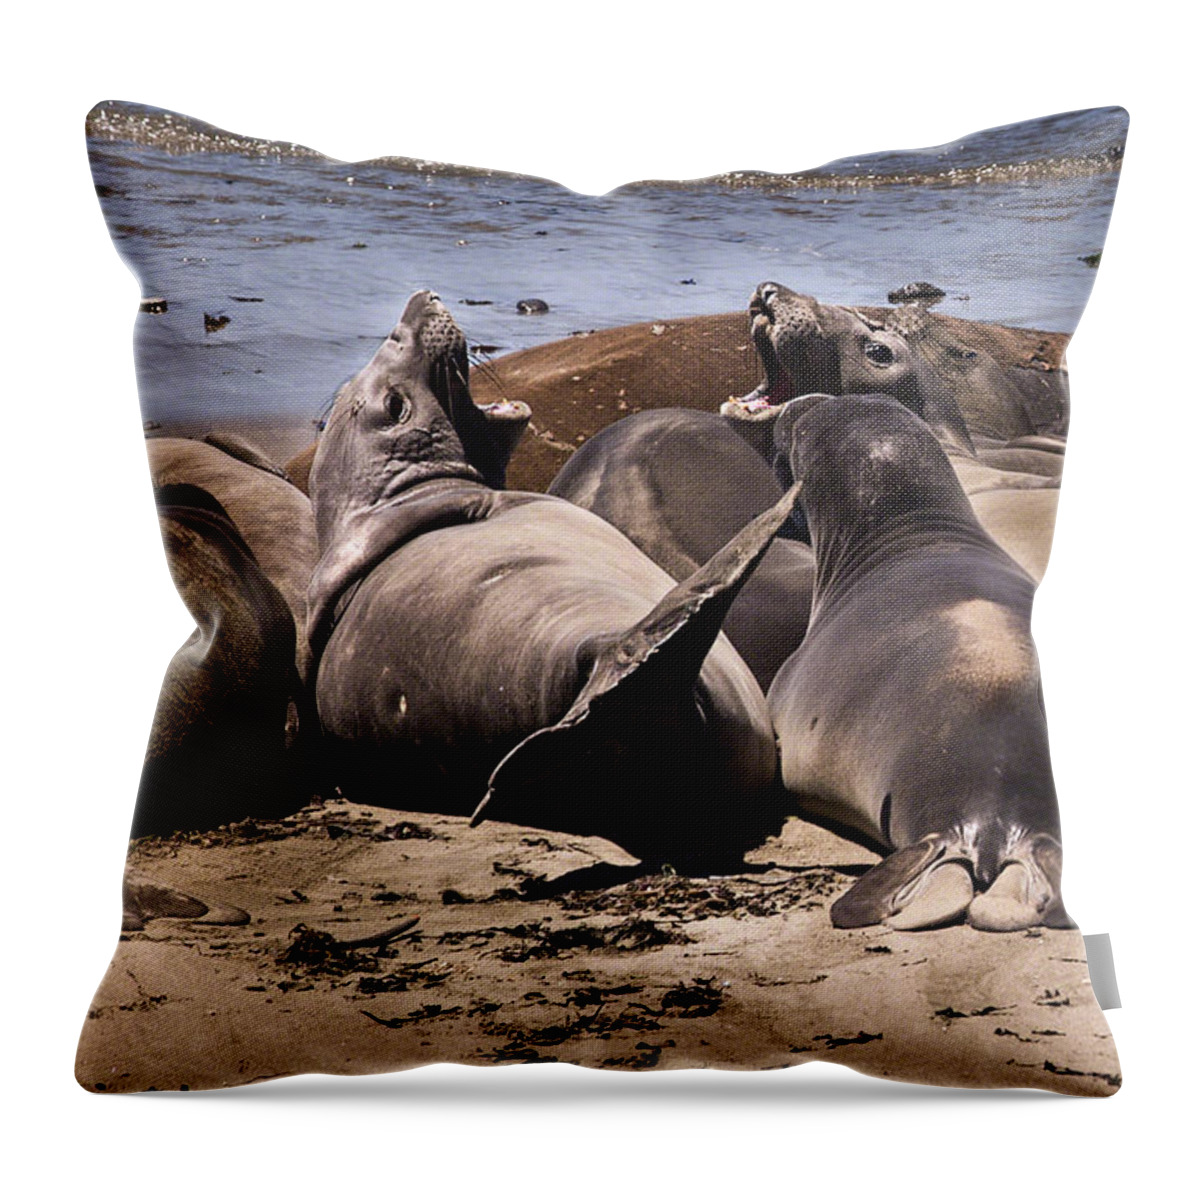 Art Throw Pillow featuring the photograph Seal Team 3 By Denise Dube by Denise Dube